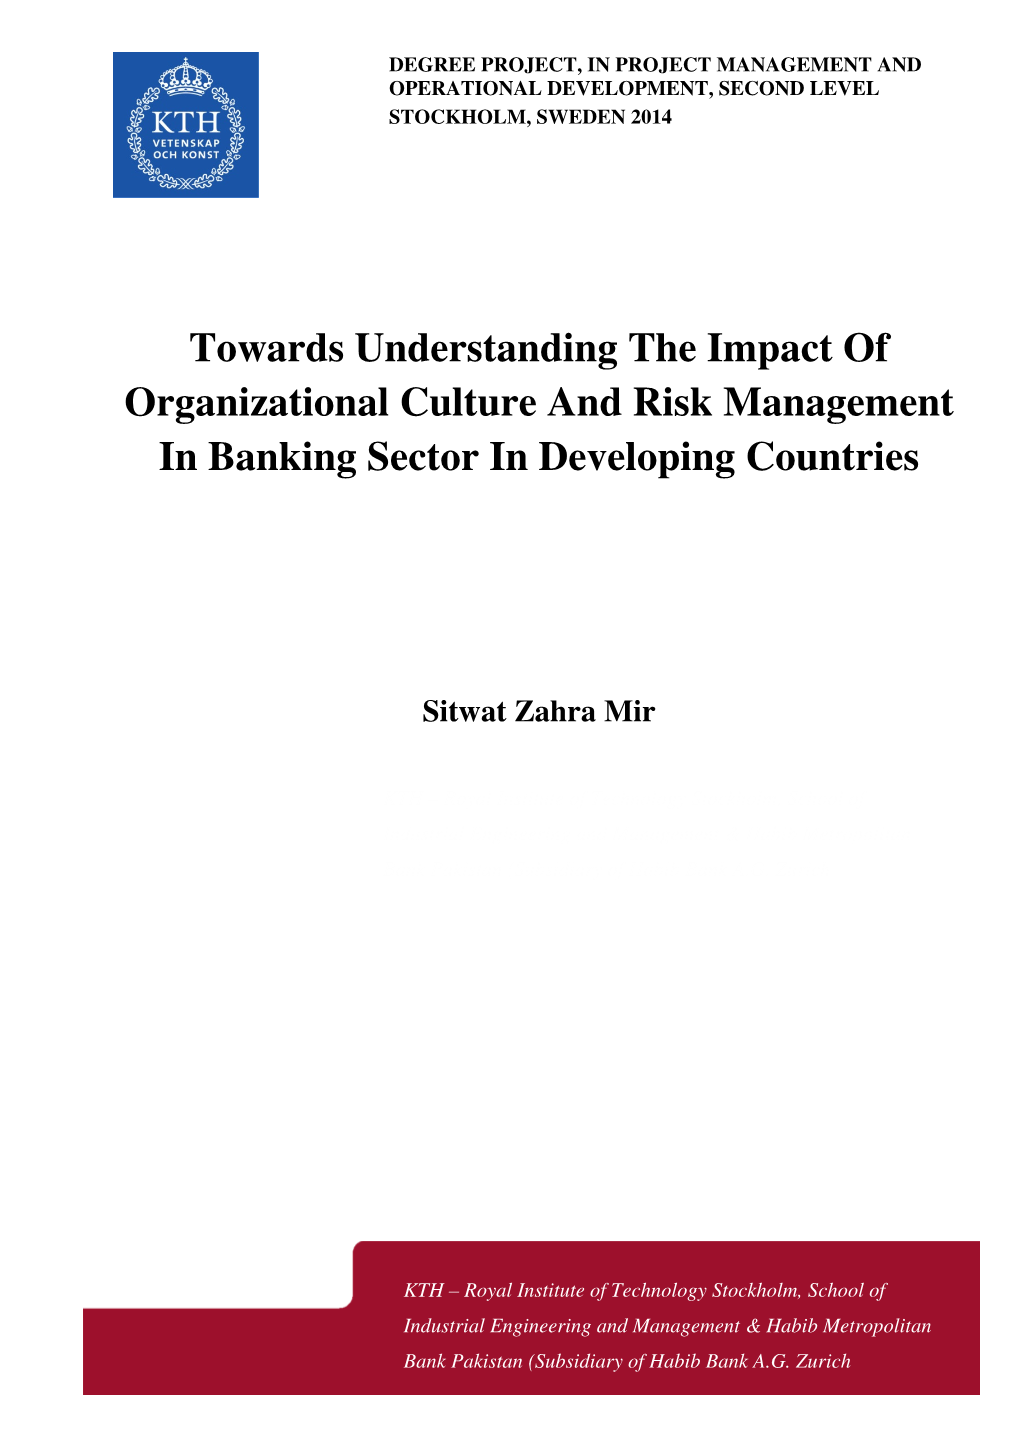 Towards Understanding the Impact of Organizational Culture and Risk Management in Banking Sector in Developing Countries